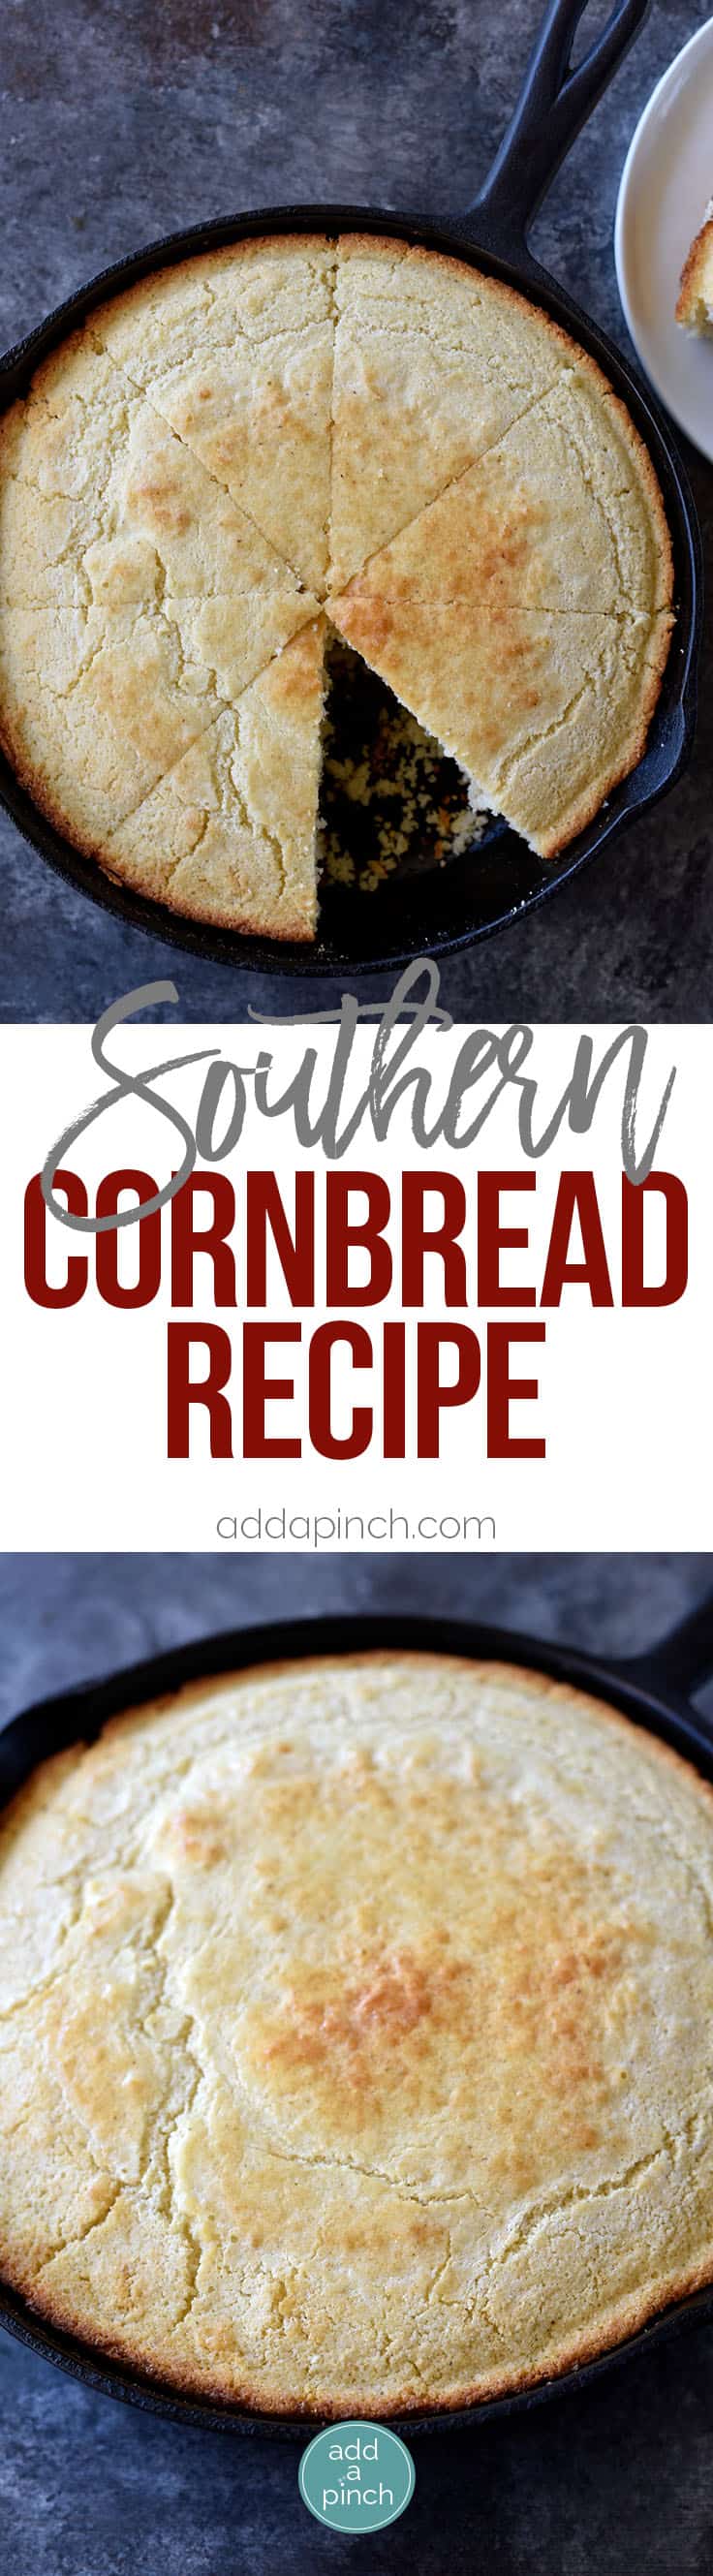 Graphic with pictures of cornbread with text 